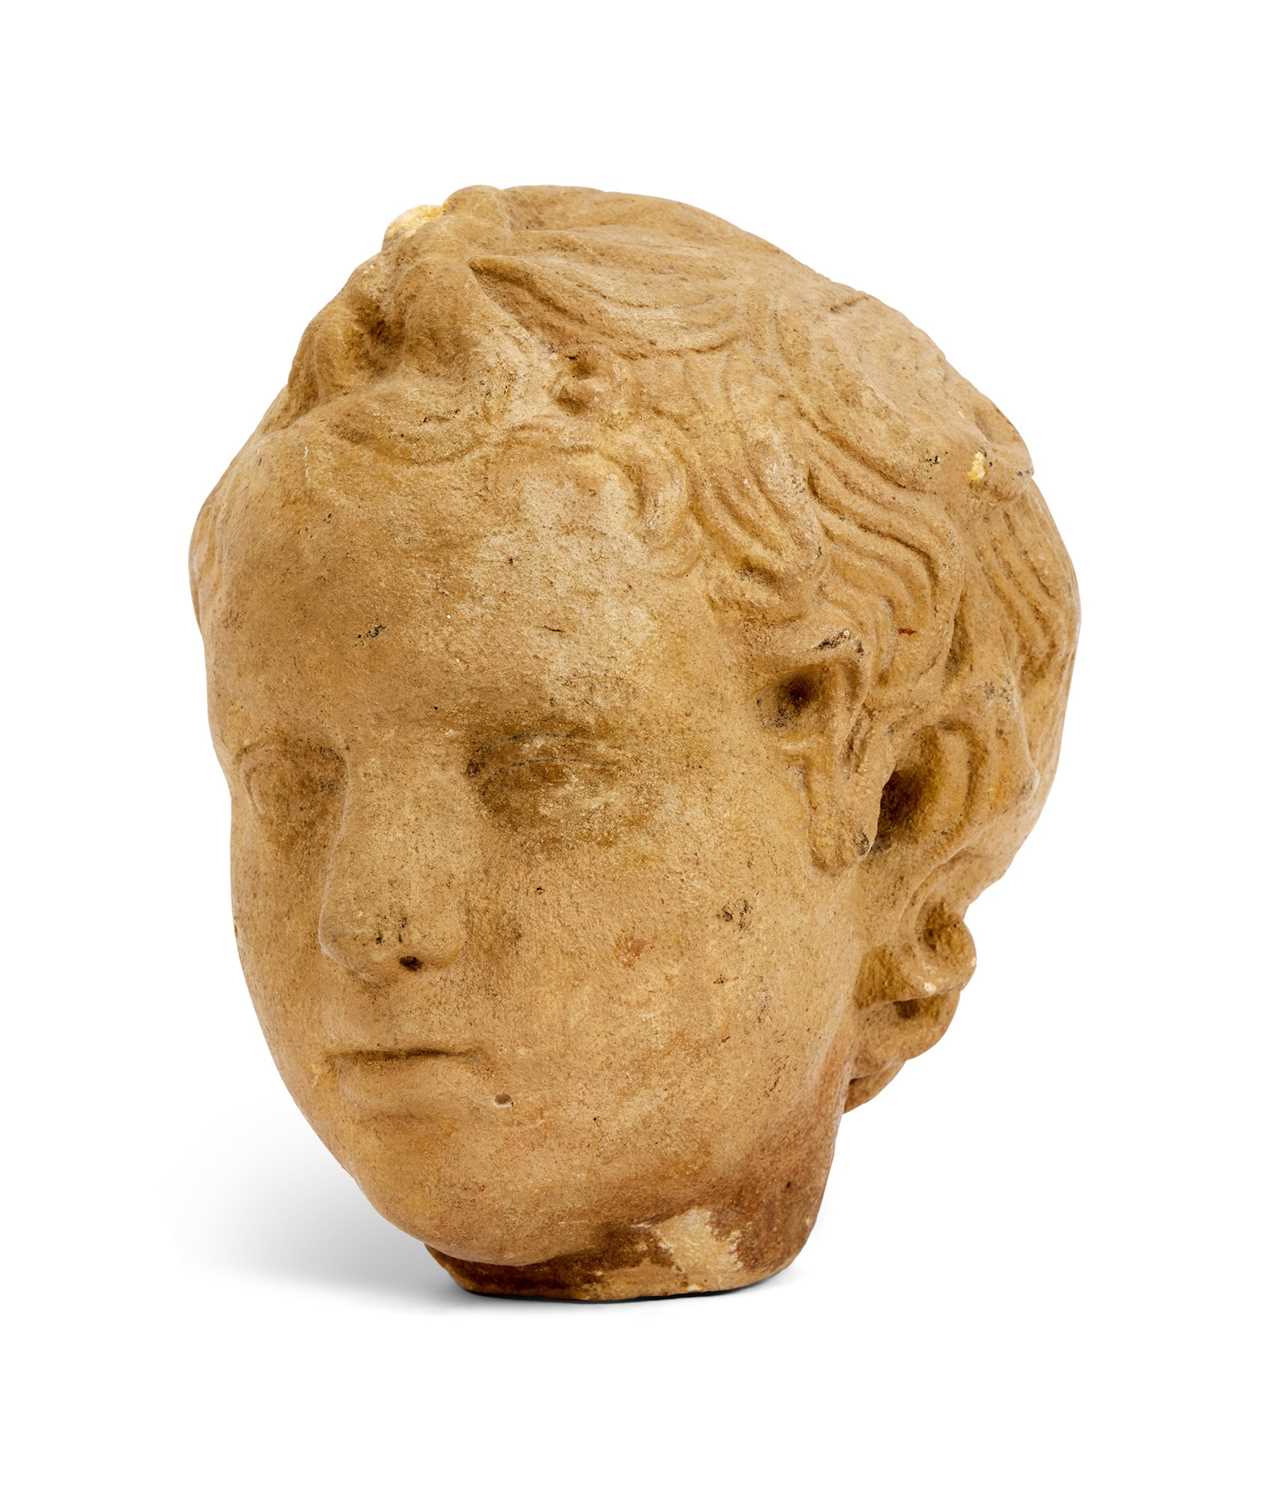 A COMPOSITION STONE HEAD IN THE STYLE OF DONATELLO